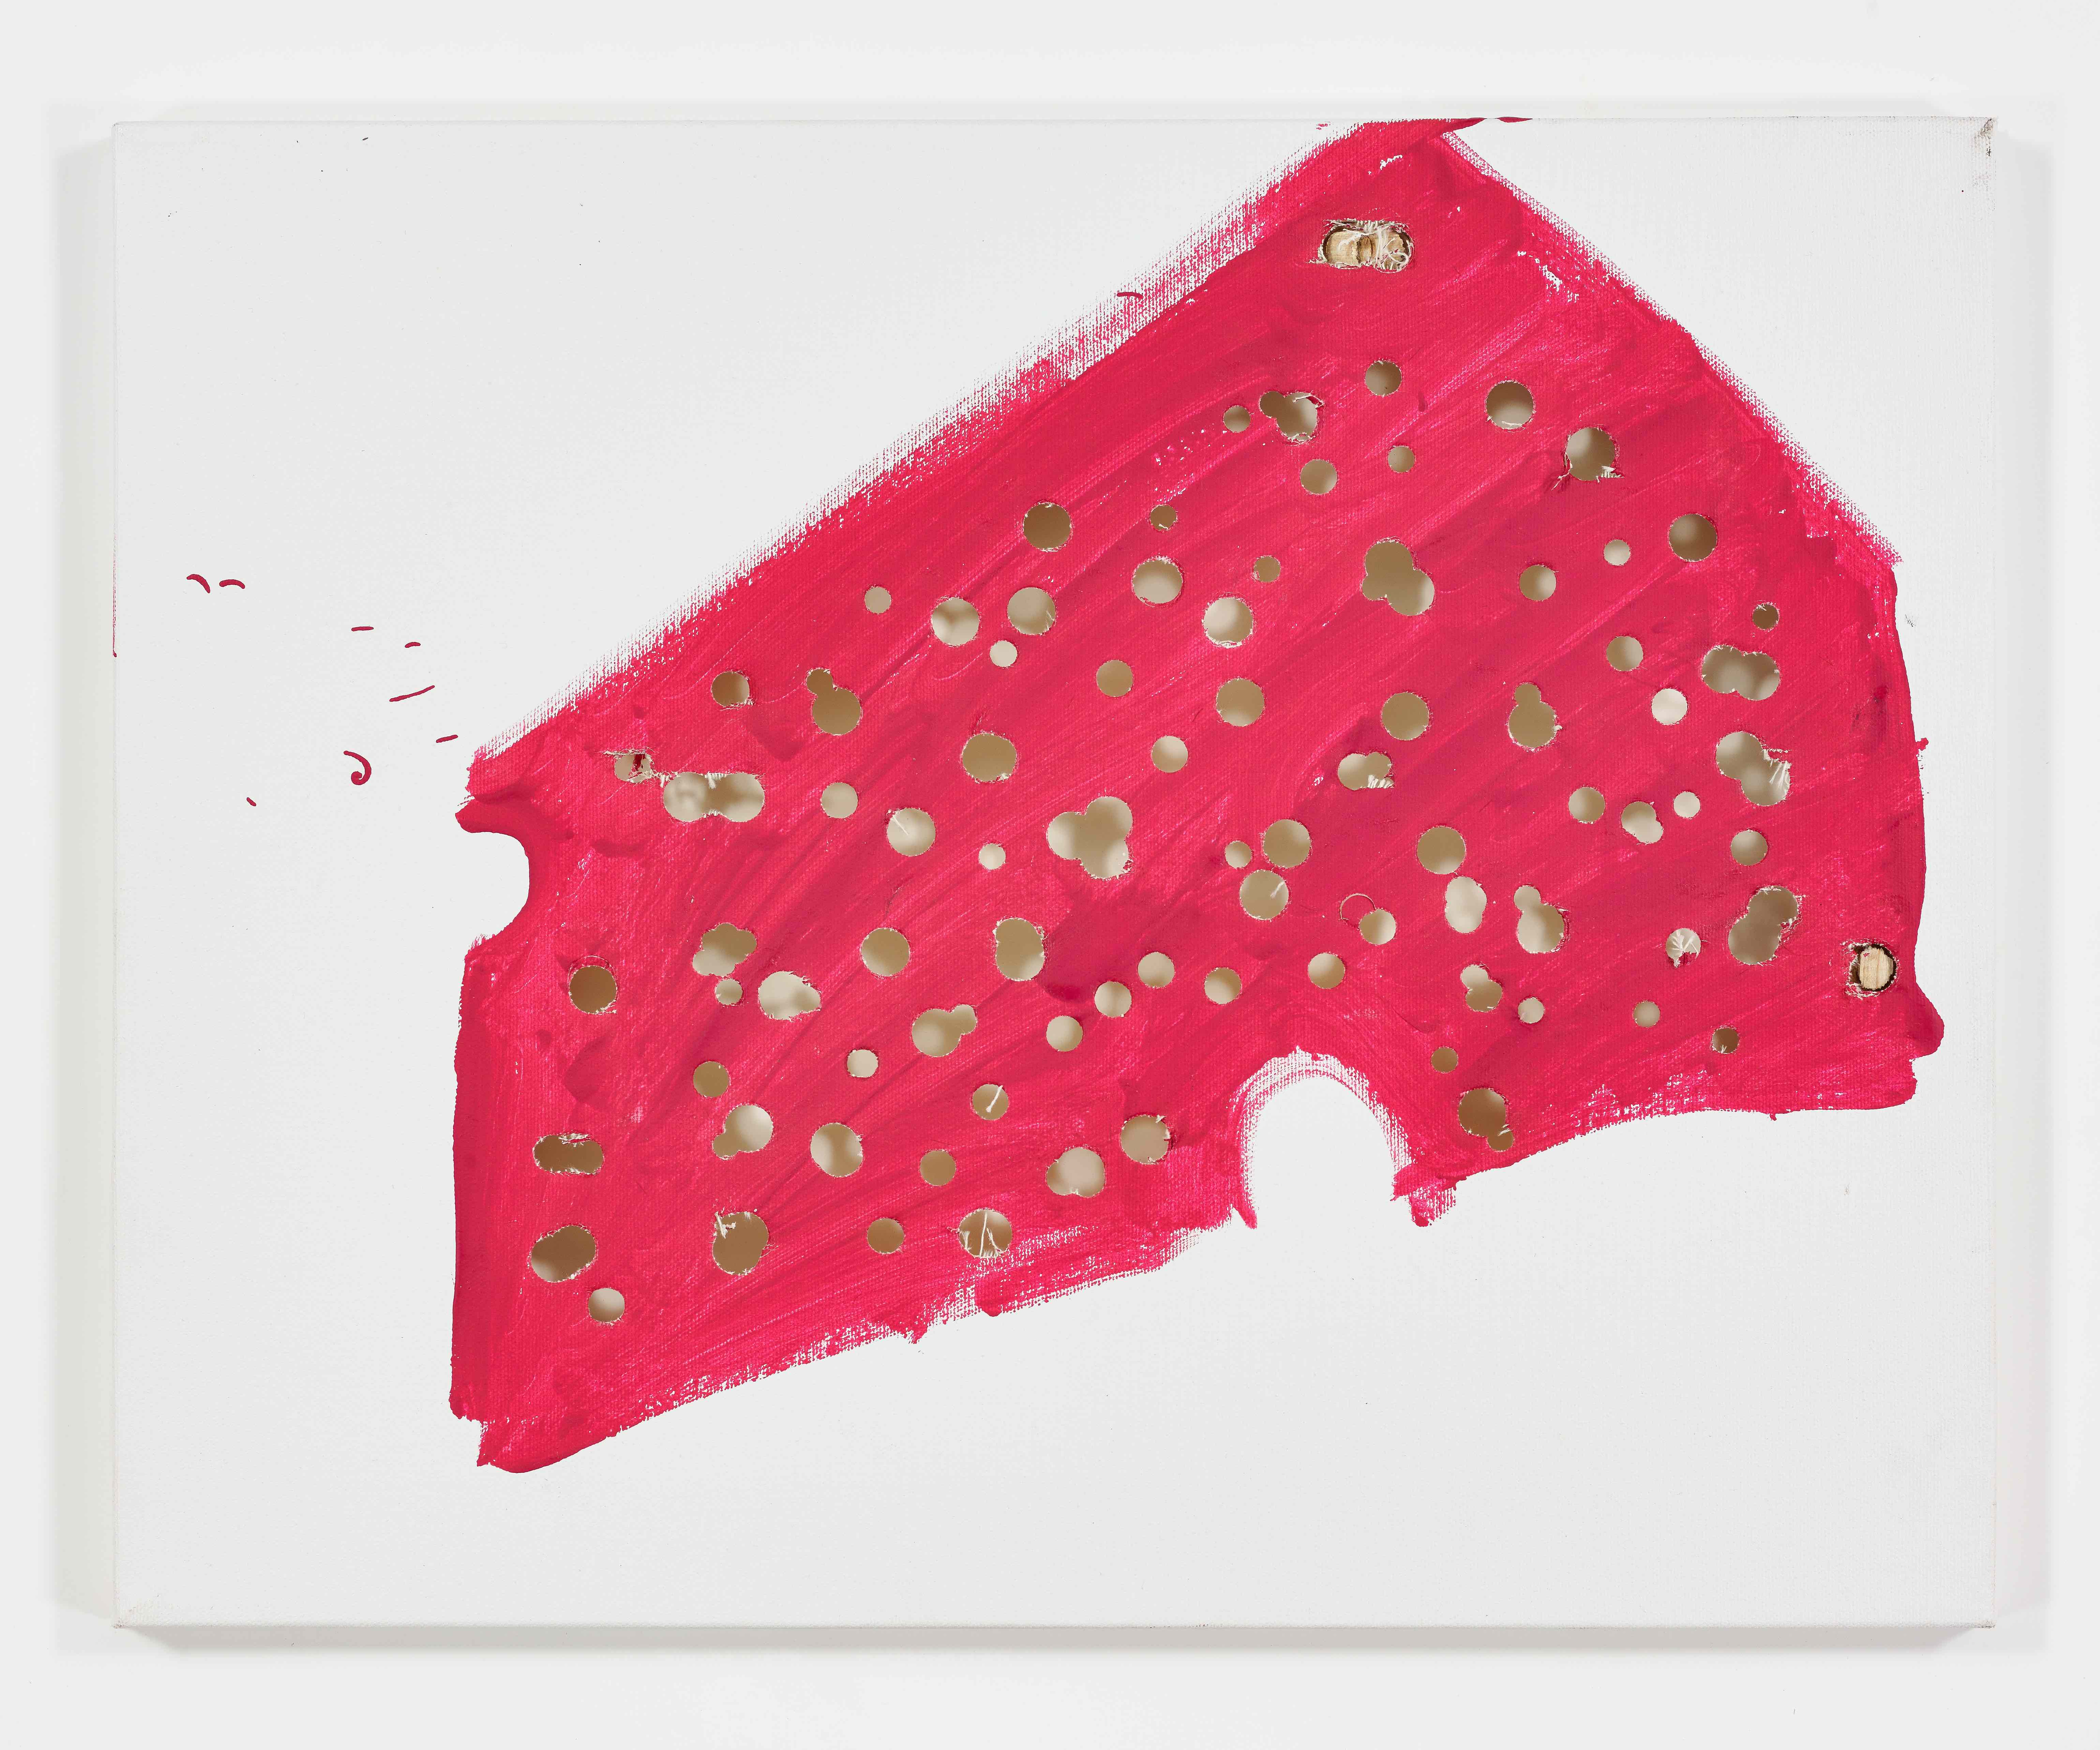 Pink Cheese Painting #4, 2012